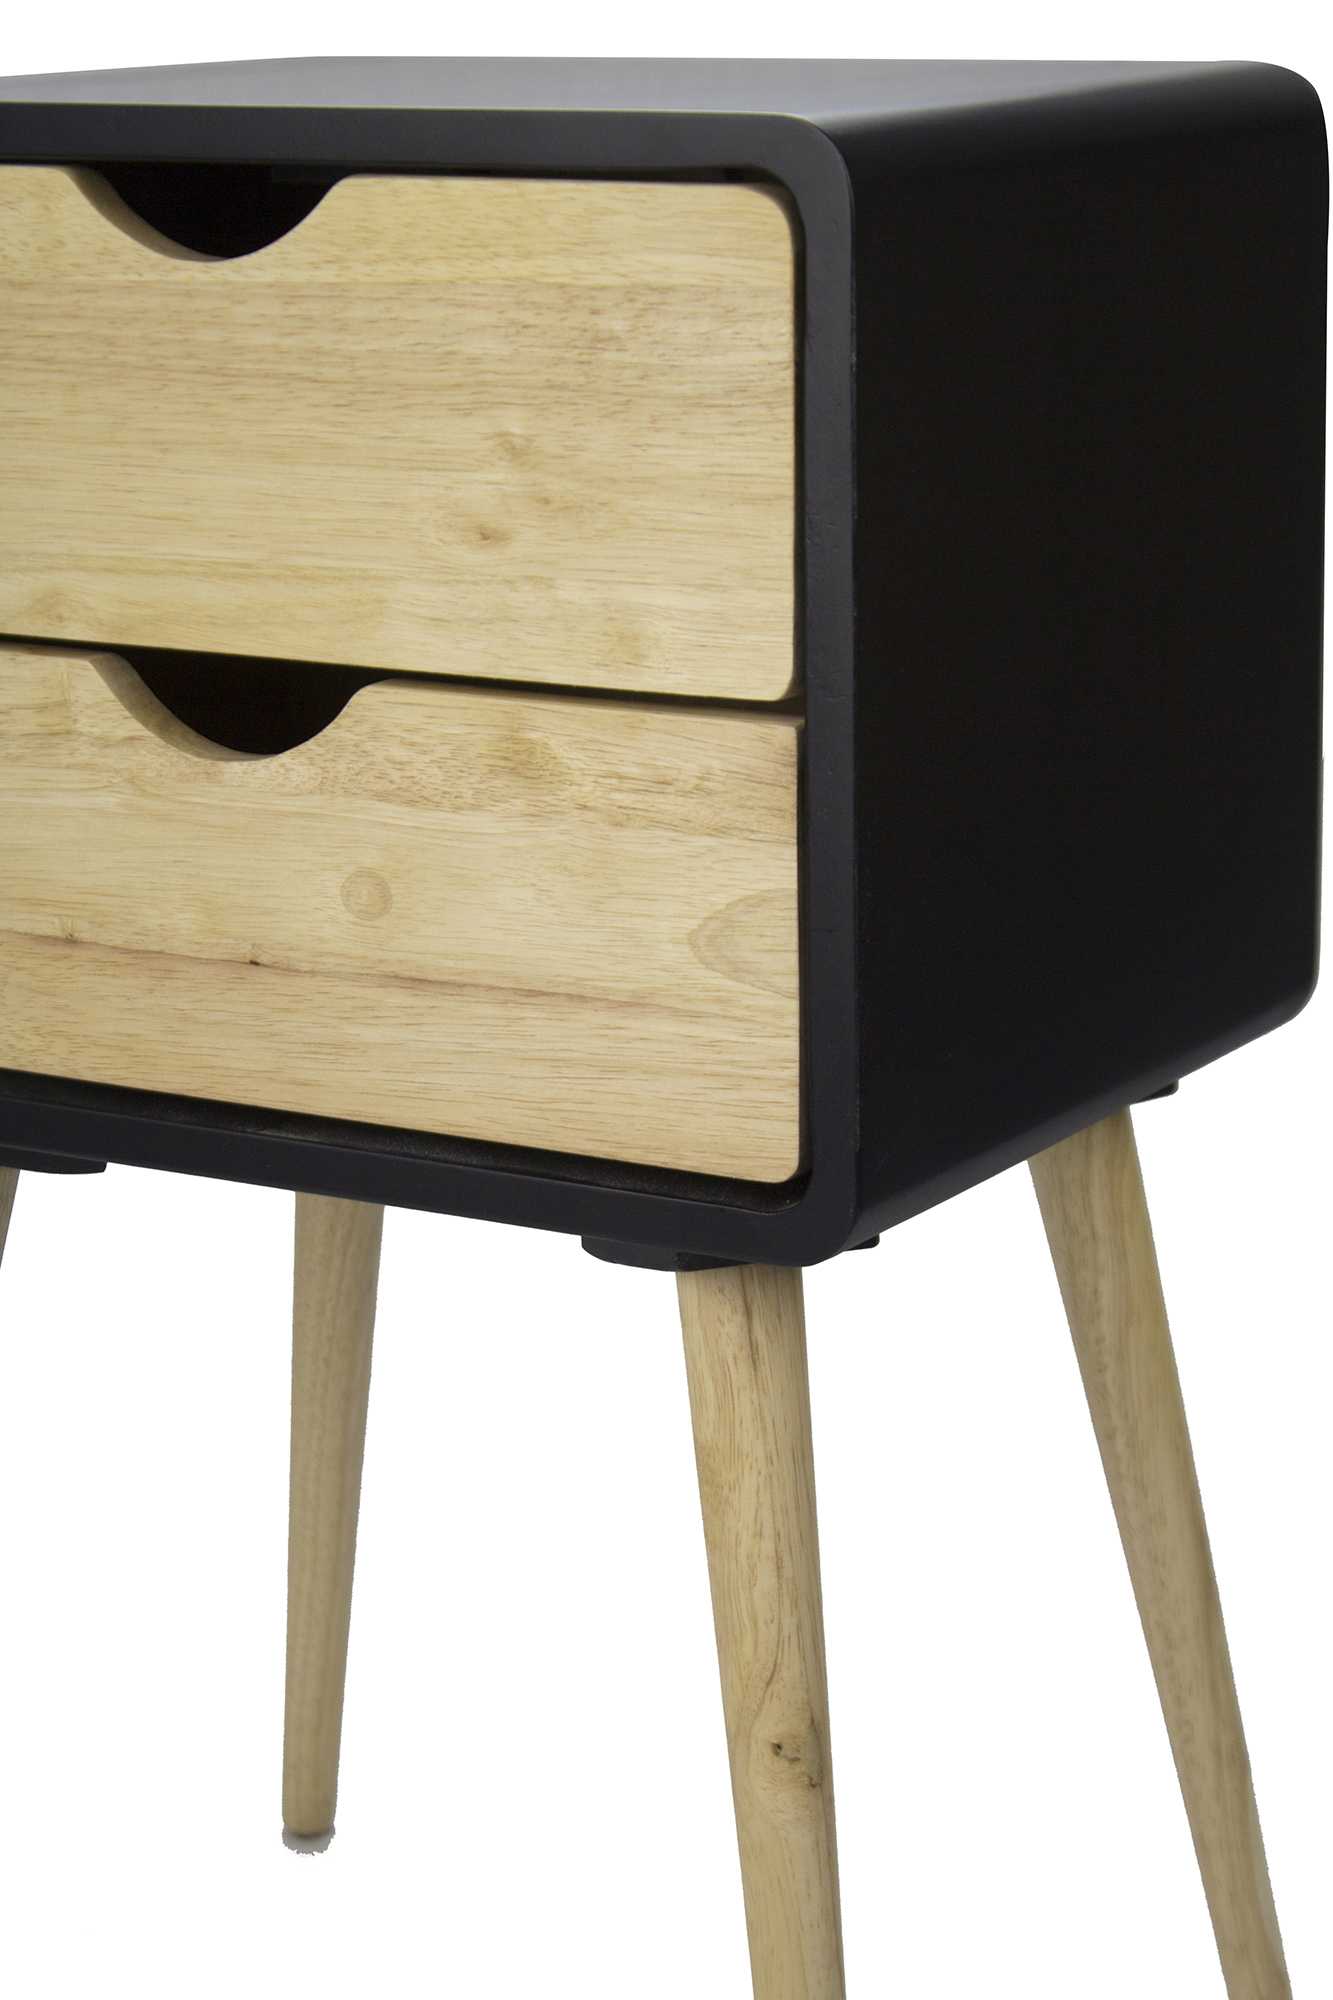 16" X 12" X 26" Black MDF Wood End Table with Drawer